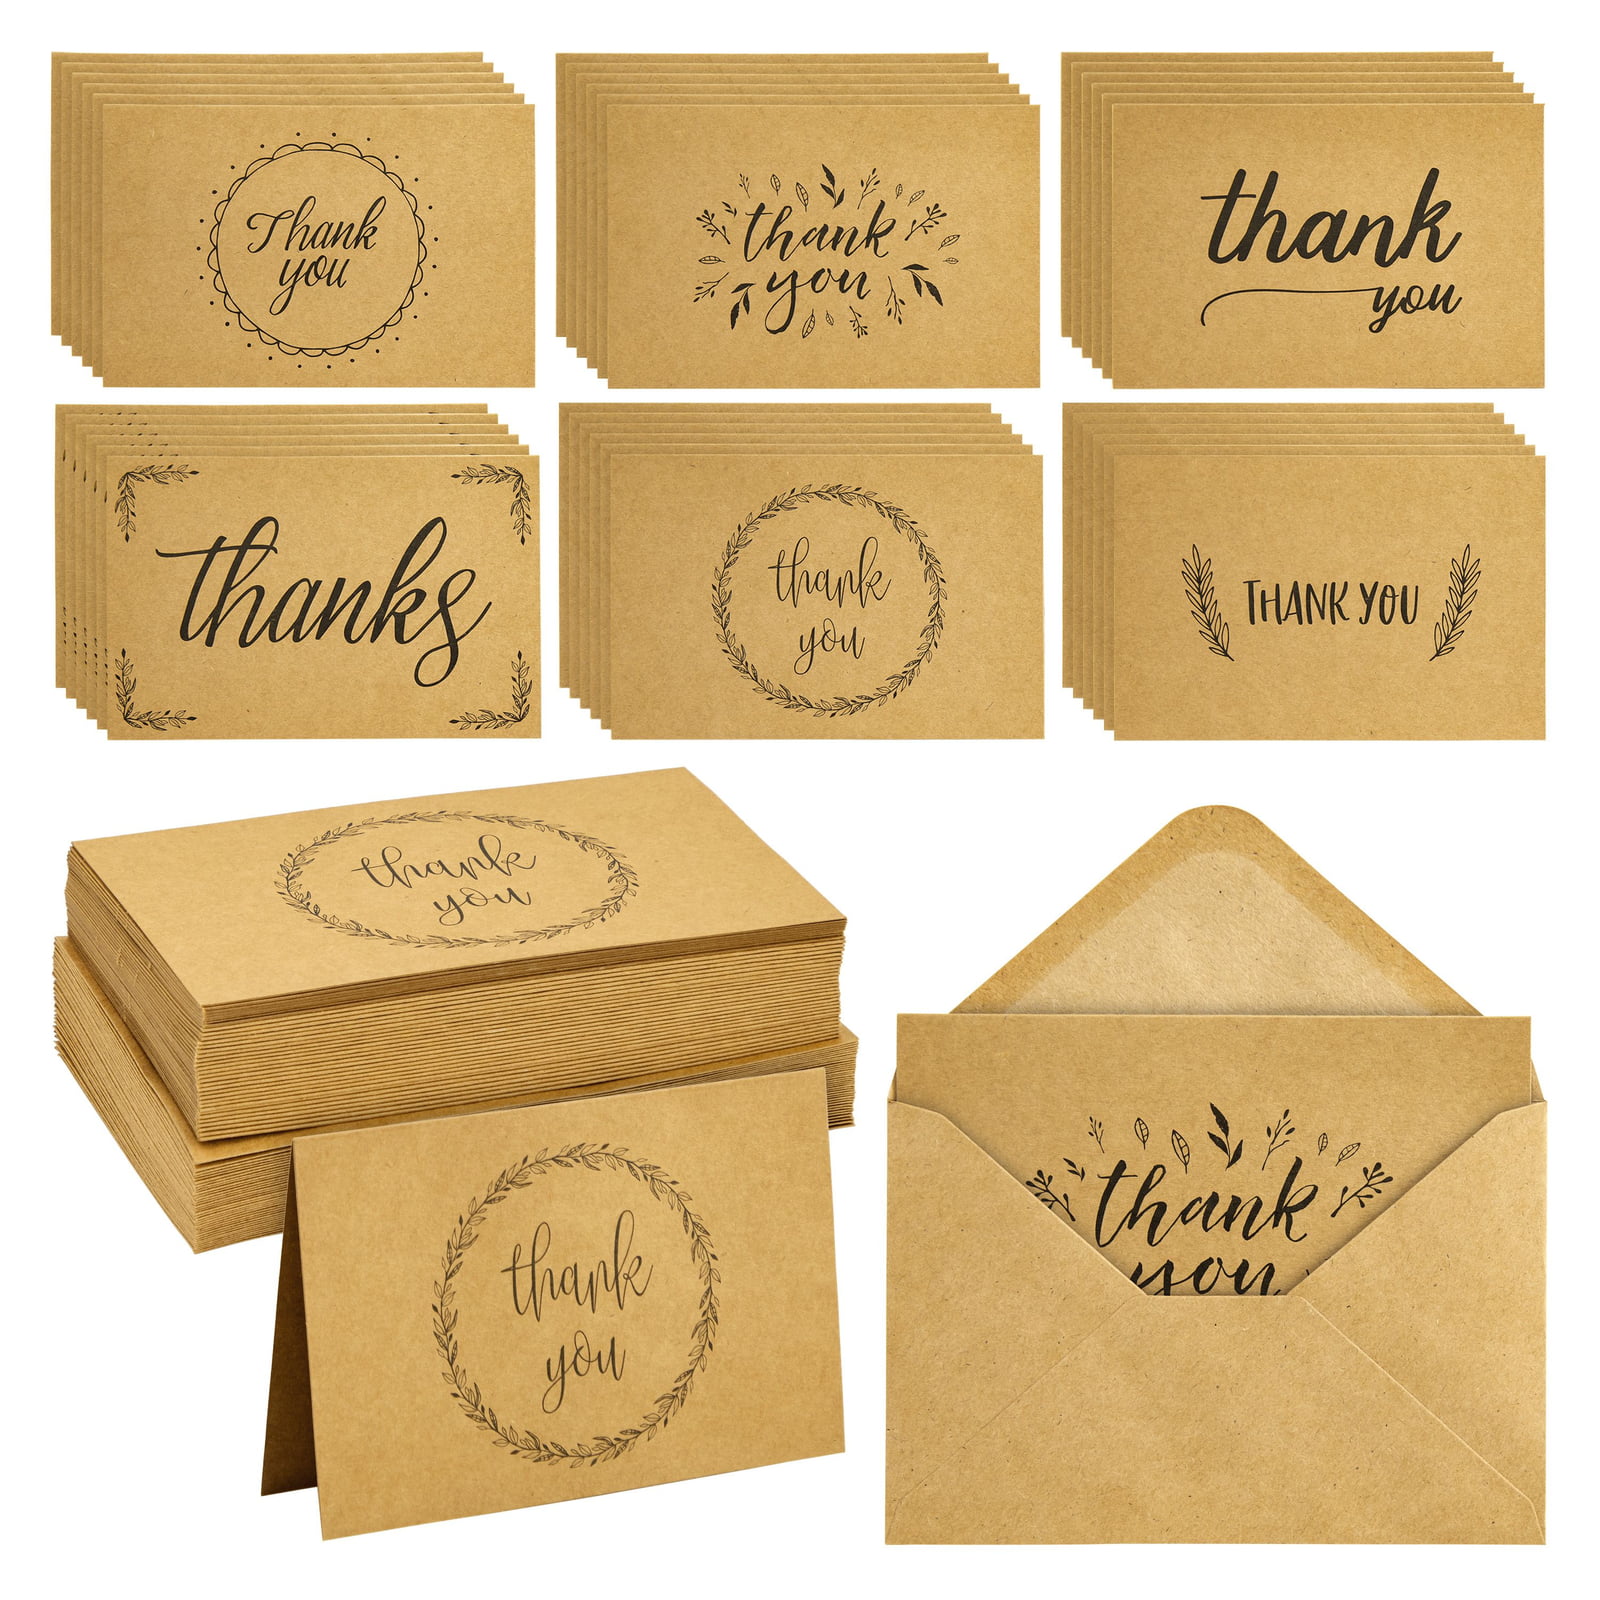 10 x PERSONALISED THANK YOU CARD ENVELOPES WEDDING WITH LABELS WHITE KRAFT 